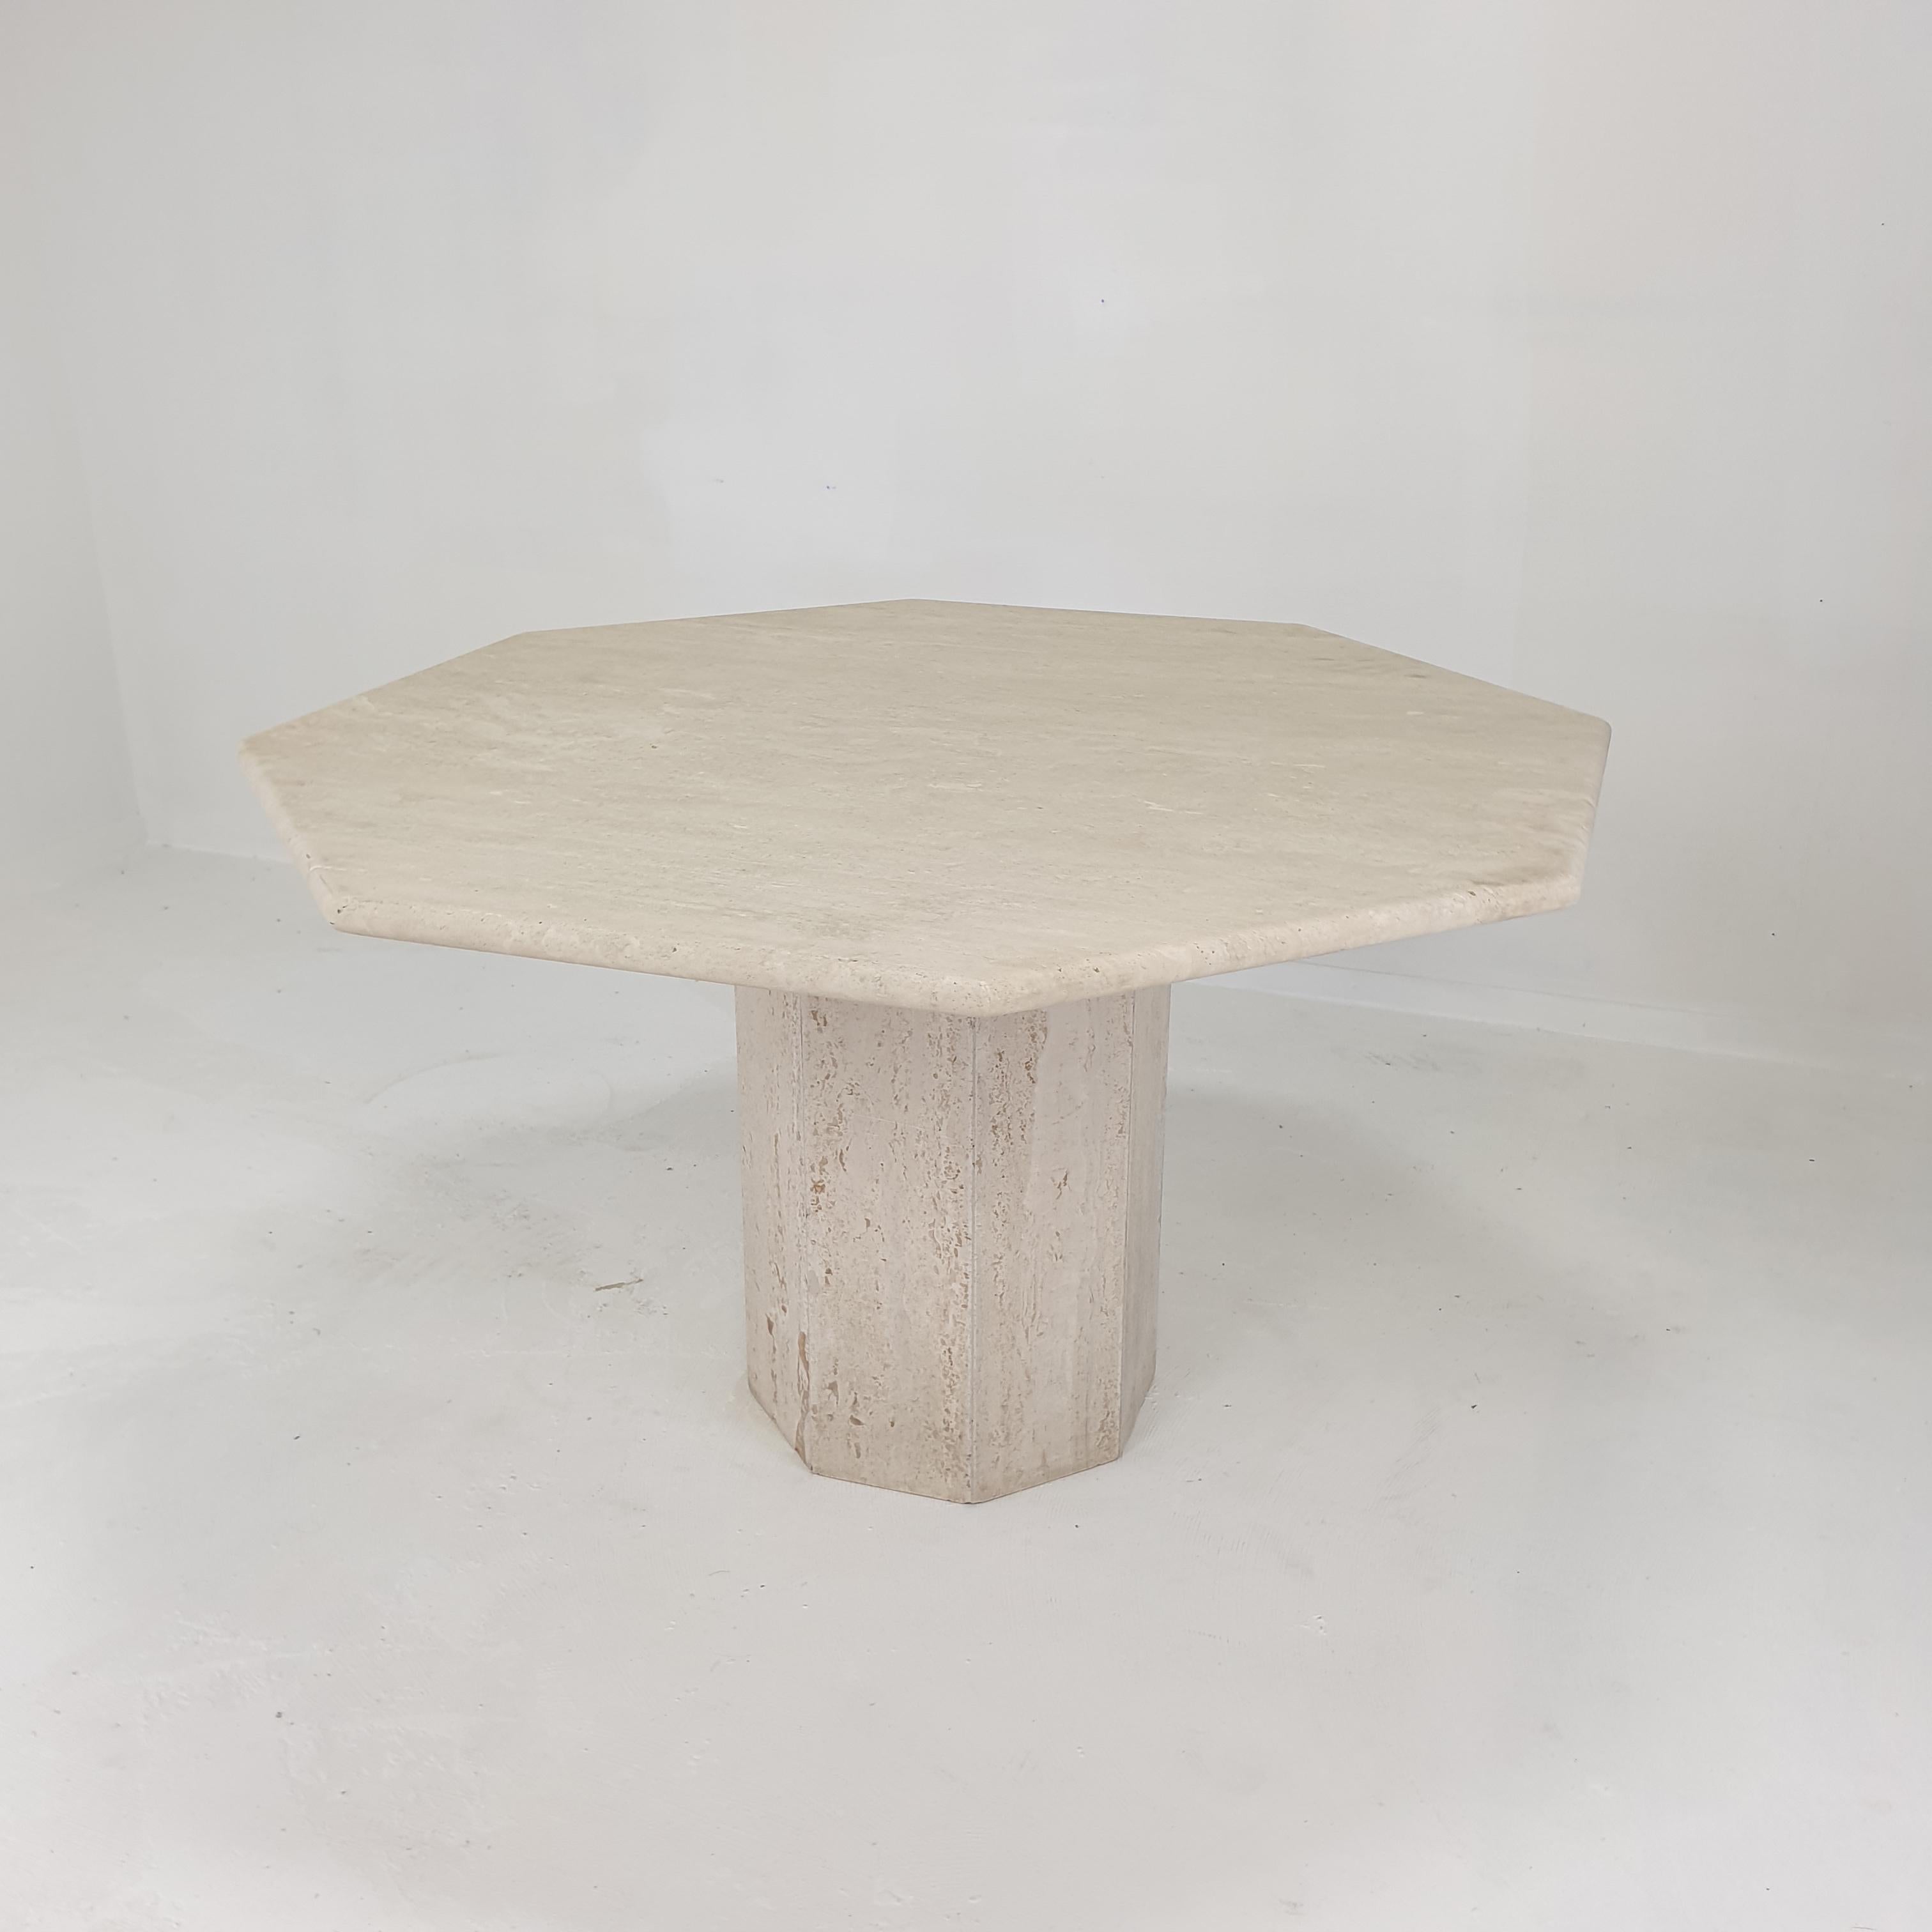 Late 20th Century Italian Travertine Garden or Dining Table, 1970s For Sale